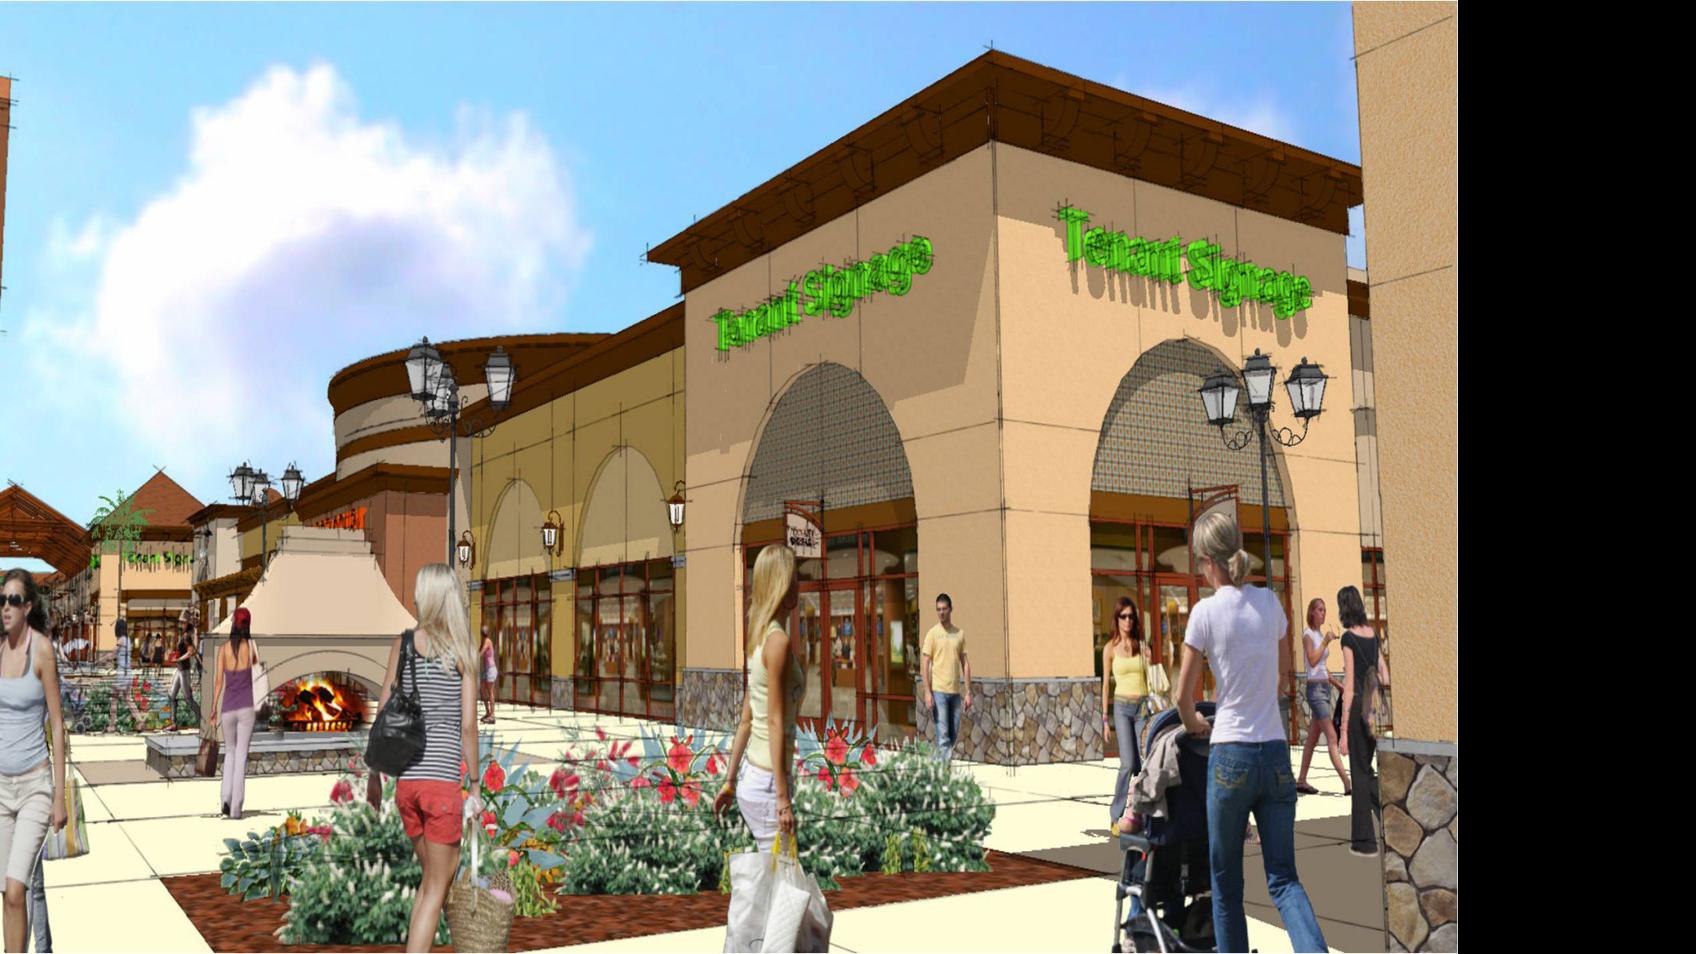 Business roundup: Dewar's to open fourth location, at Tejon outlets | News  